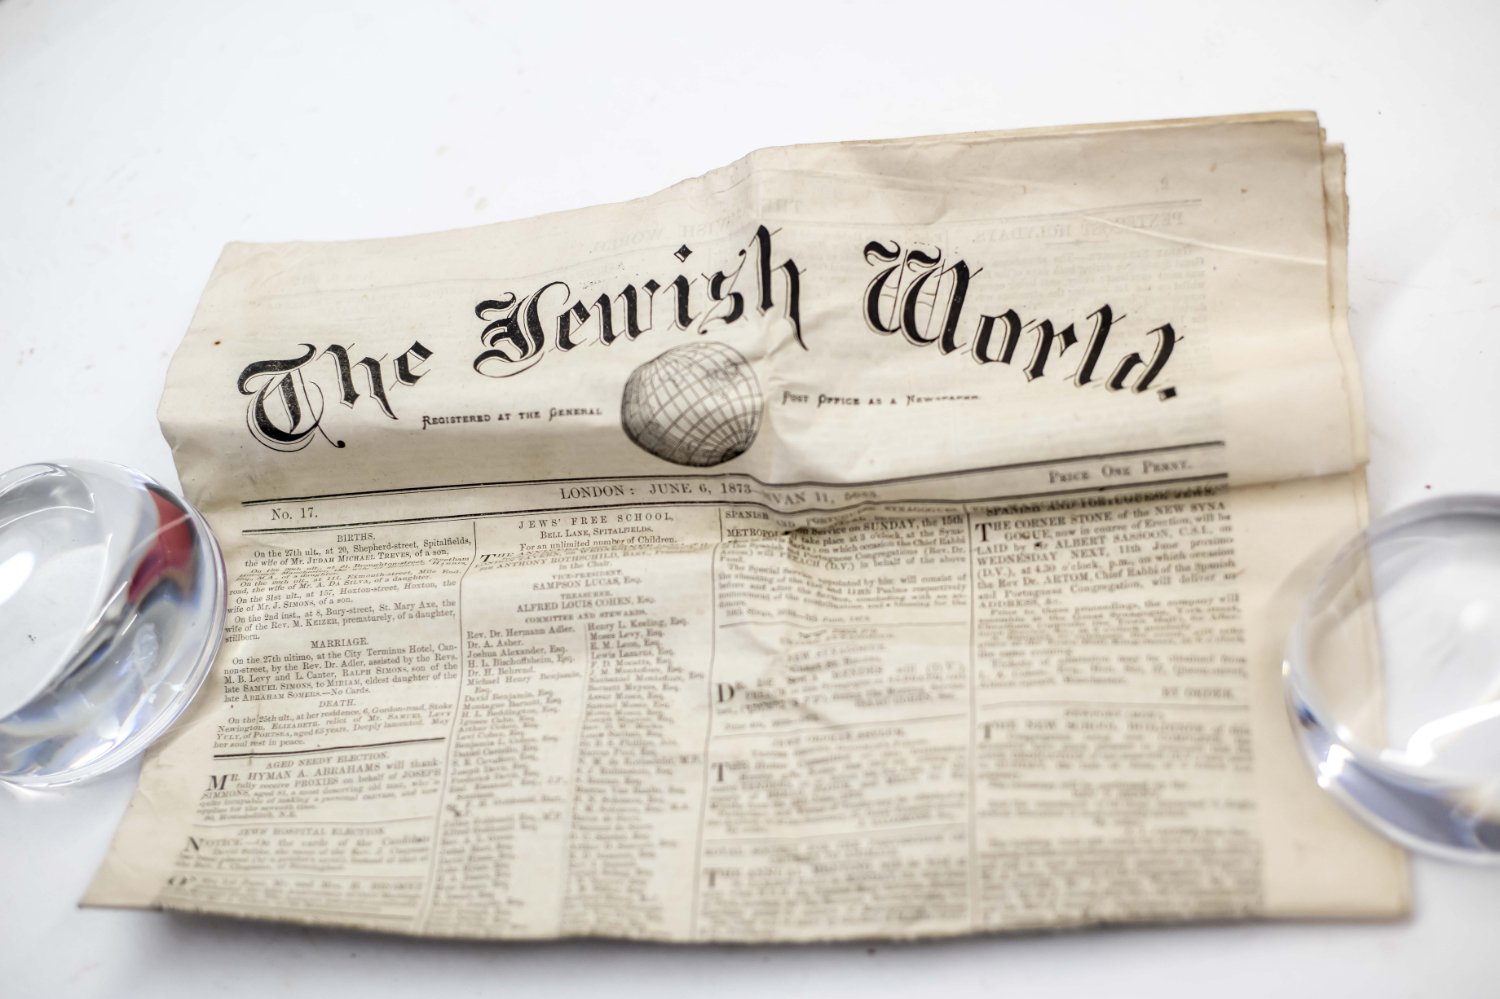 The Jewish World issue from 6.6.1873 found in the time capsule, credit Chris Payne SML.jpg